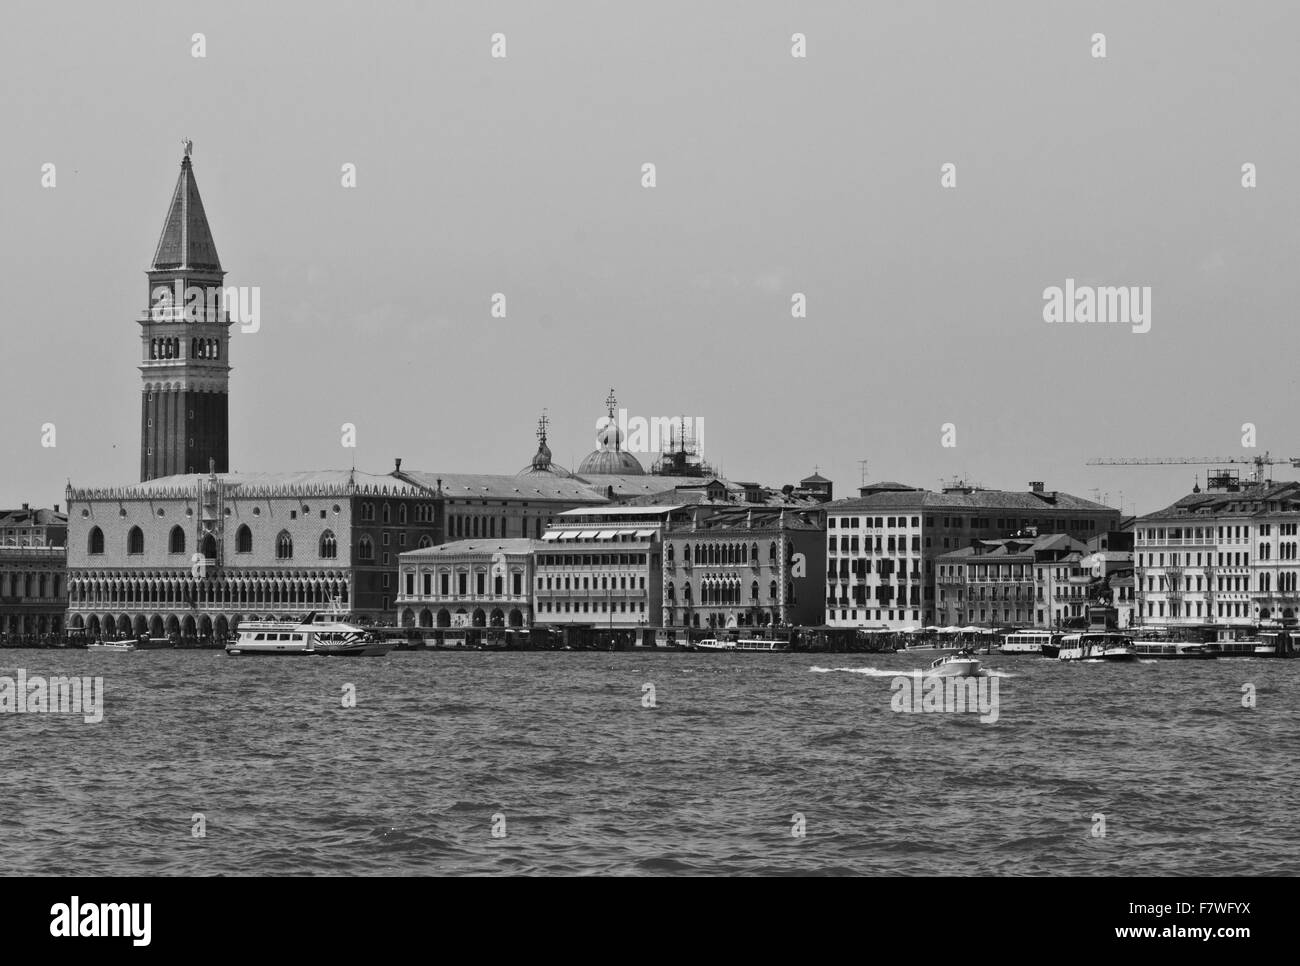 Venice, Italy, June 6 2014: Venice overview, panoramic view from the boat, with St. Mark Basilica Bell Tower in the backgroung Stock Photo